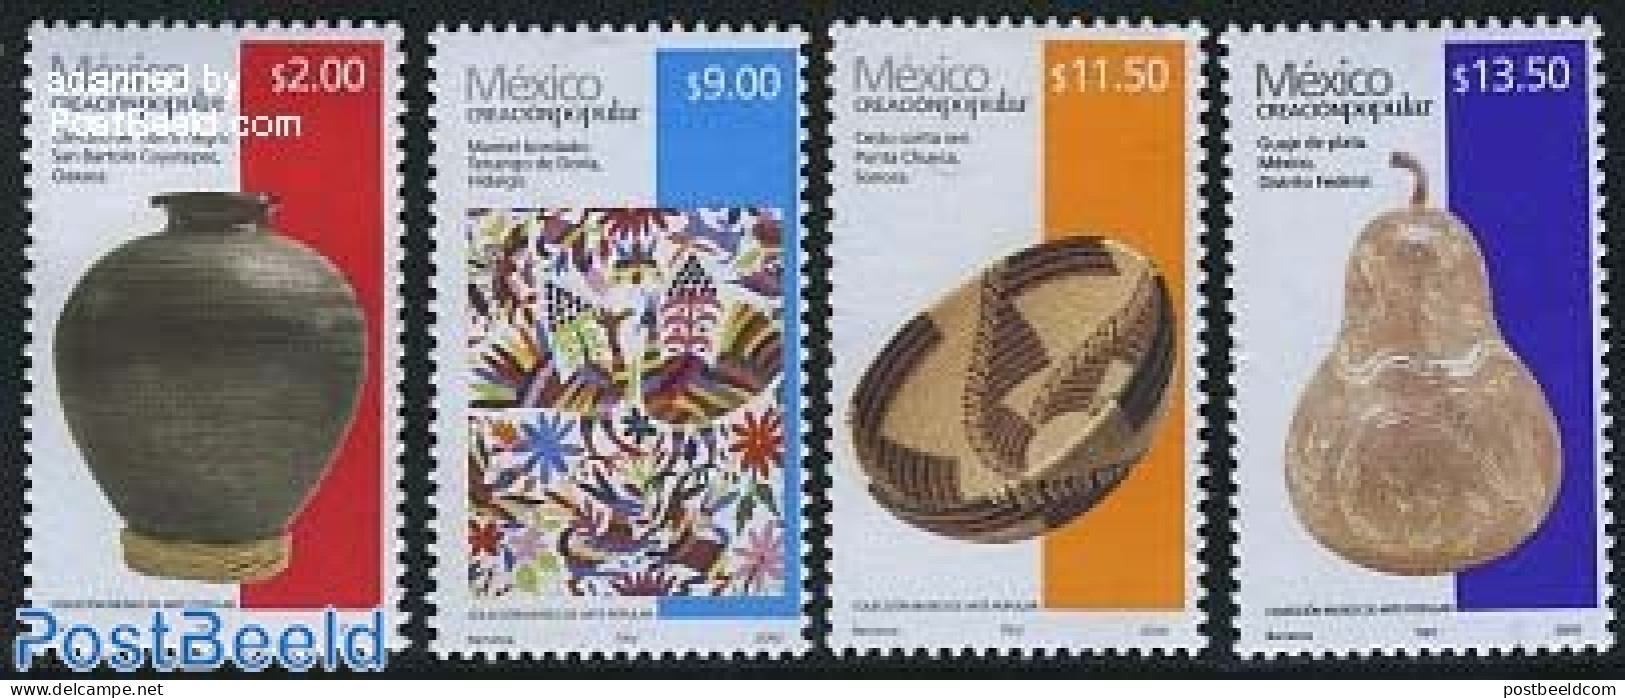 Mexico 2010 Definitives 4v (with Year 2010), Mint NH, Art - Ceramics - Porcelaine